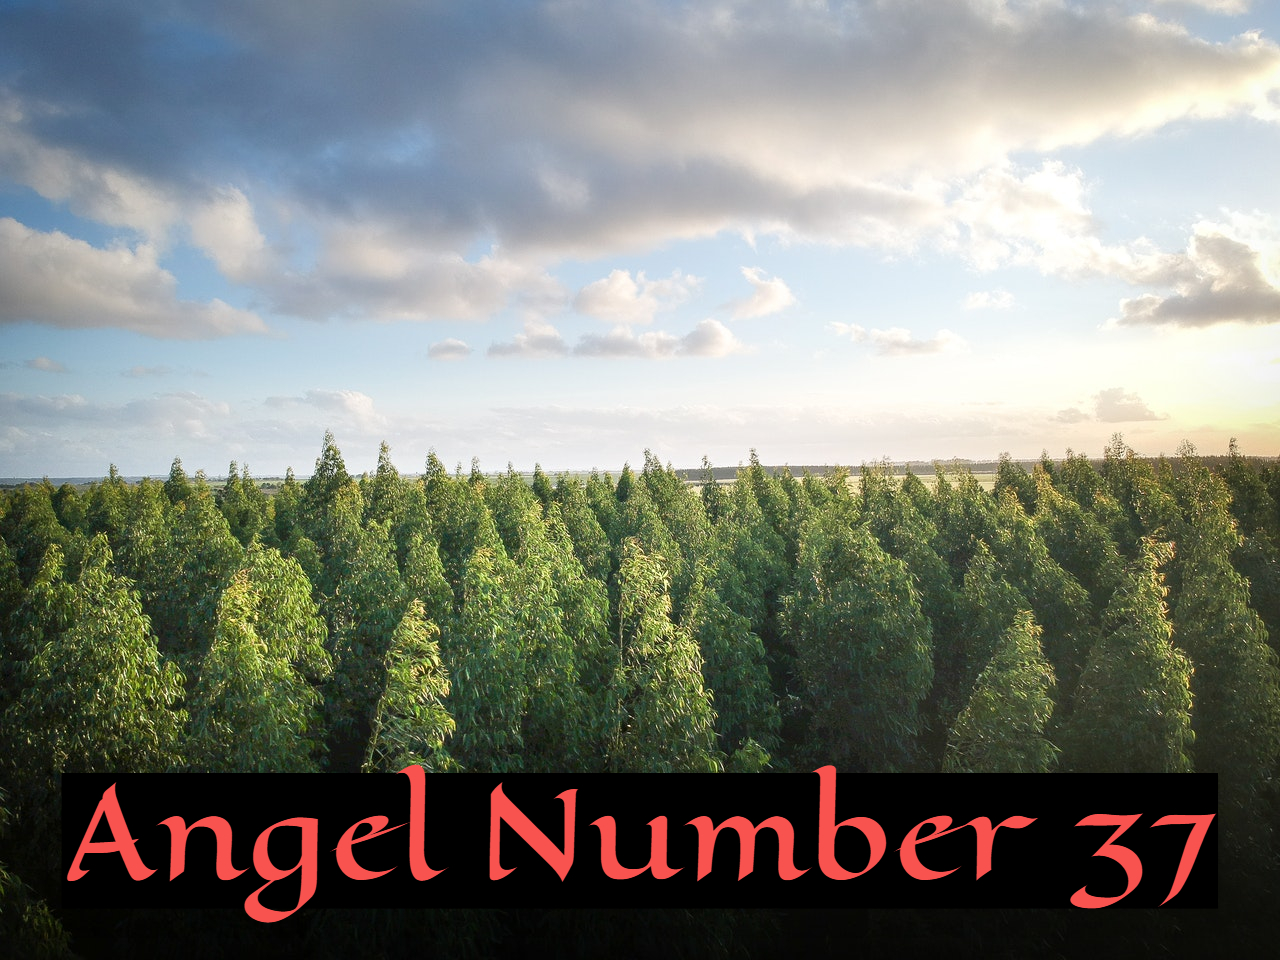 Angel Number 37 - Is An Extremely Positive Message